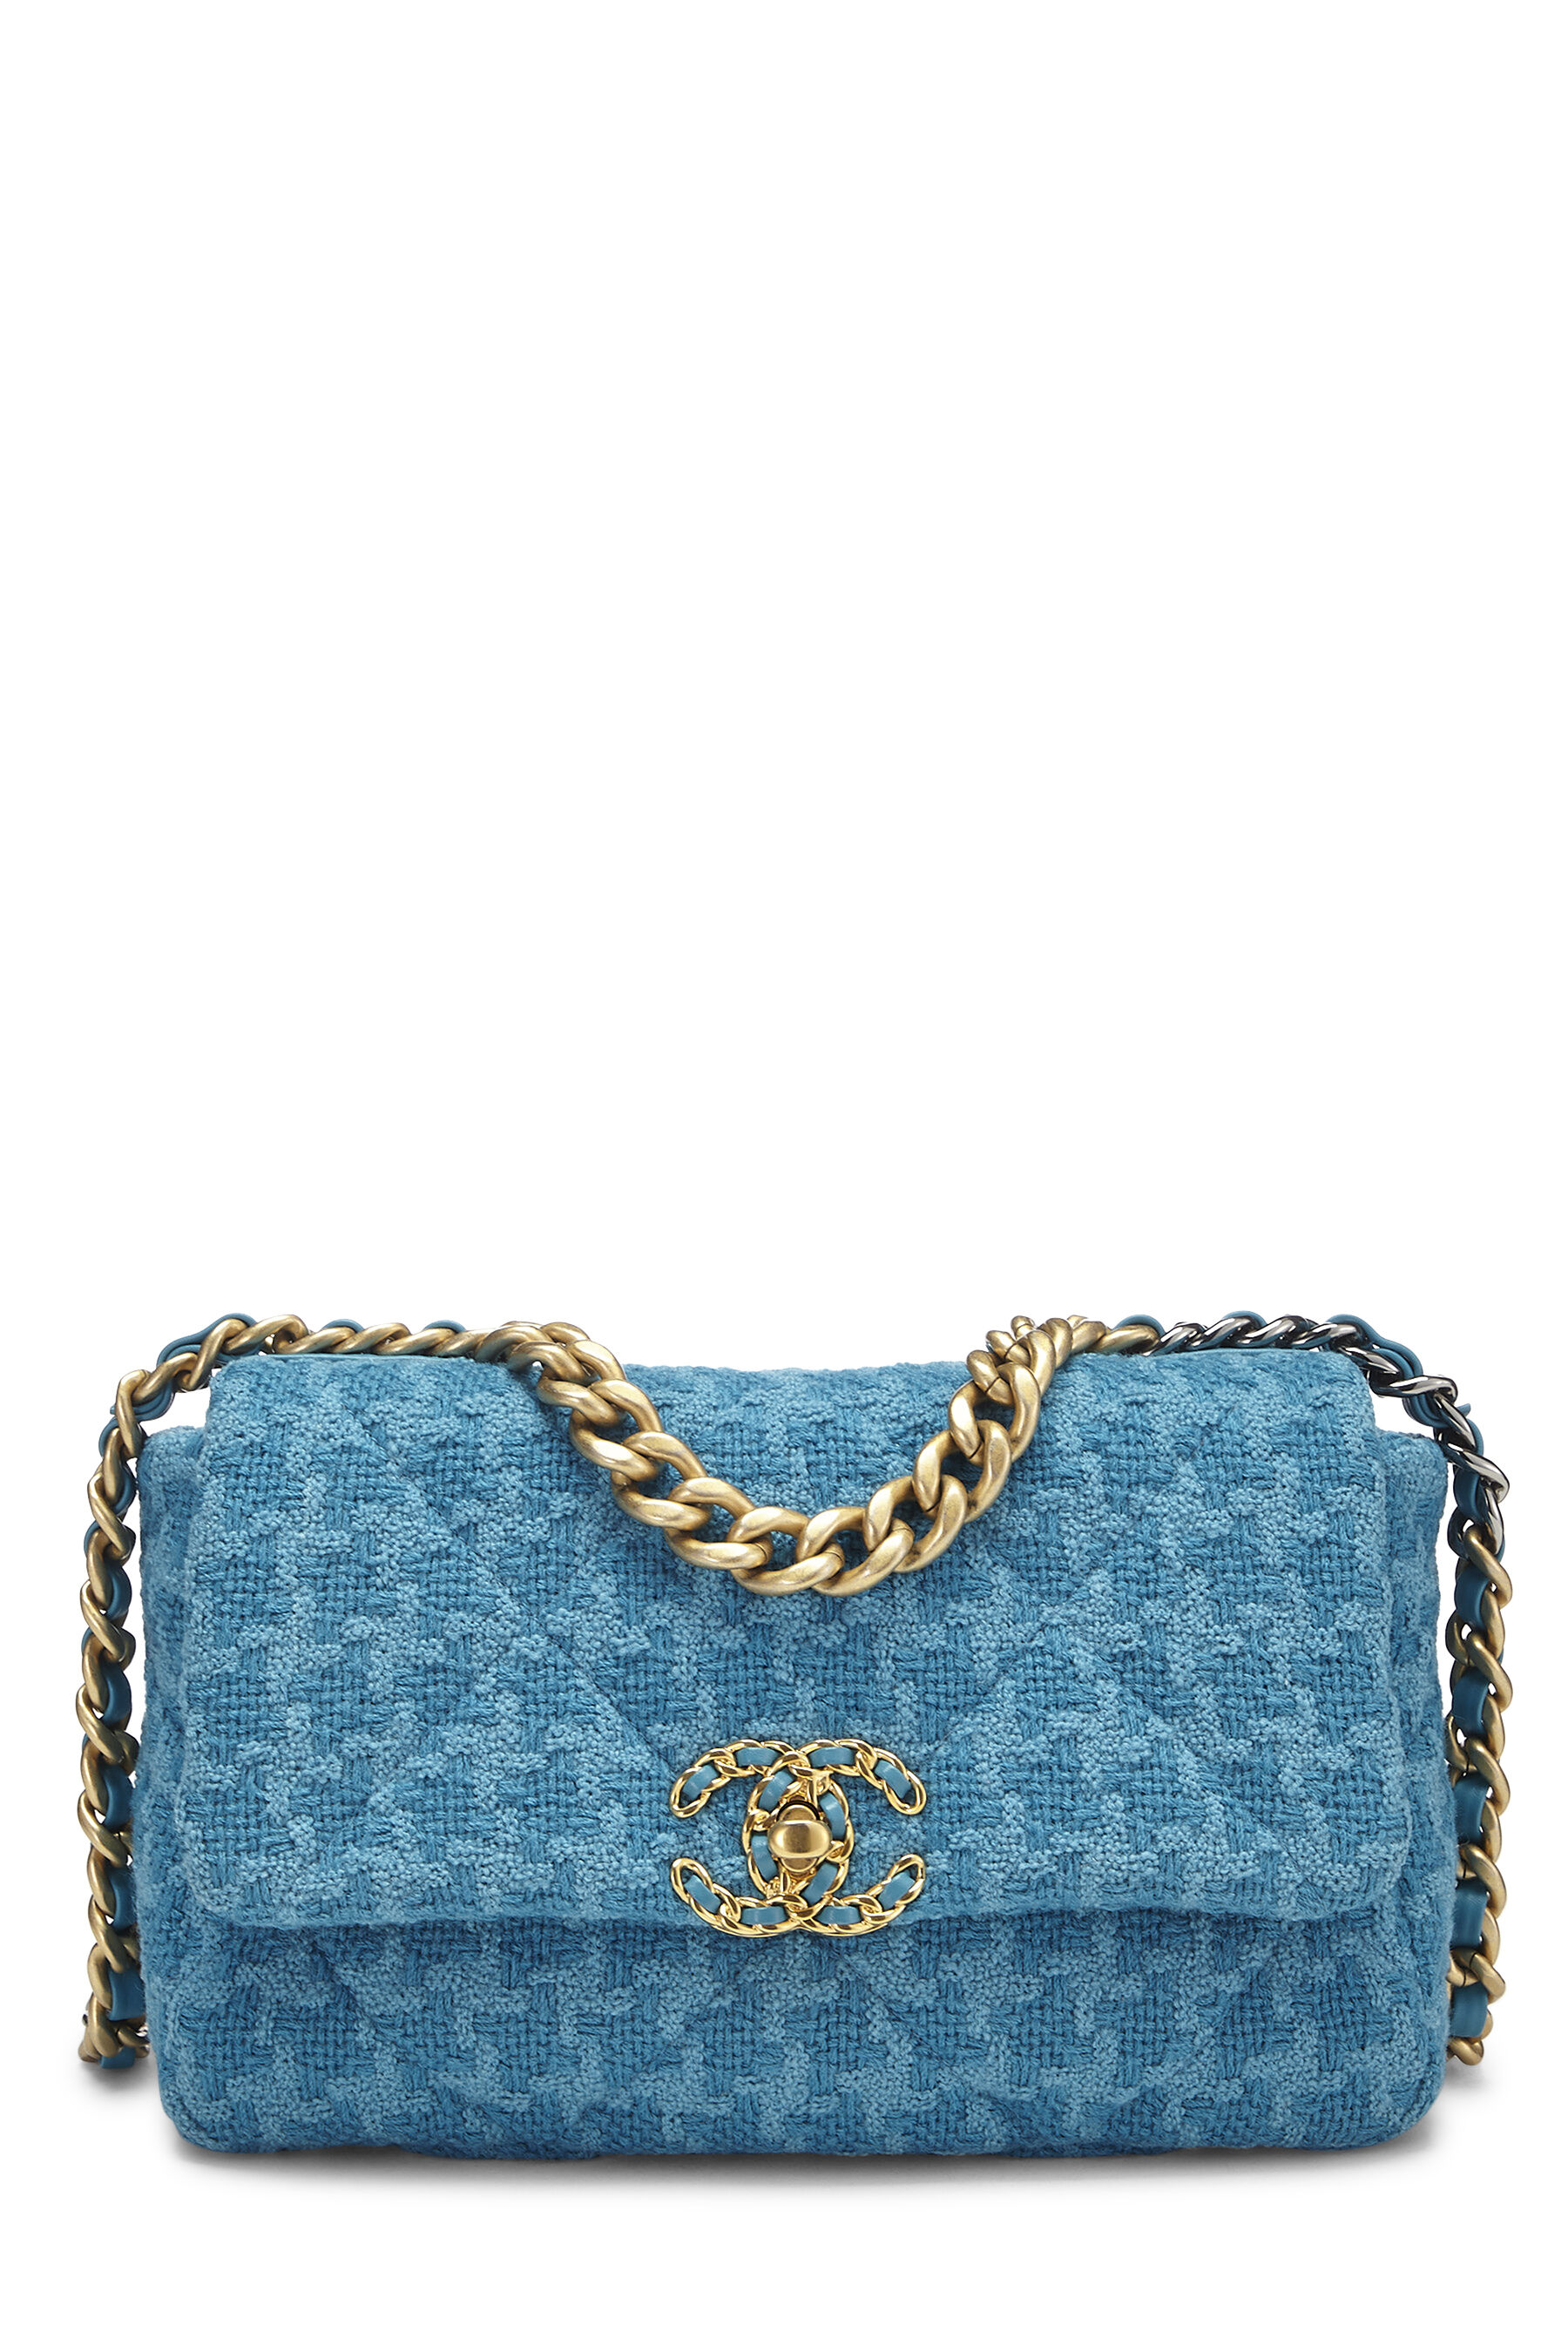 New W Box Authentic Chanel 19 Flap Bag Quilted Tweed Large Blue (2019)